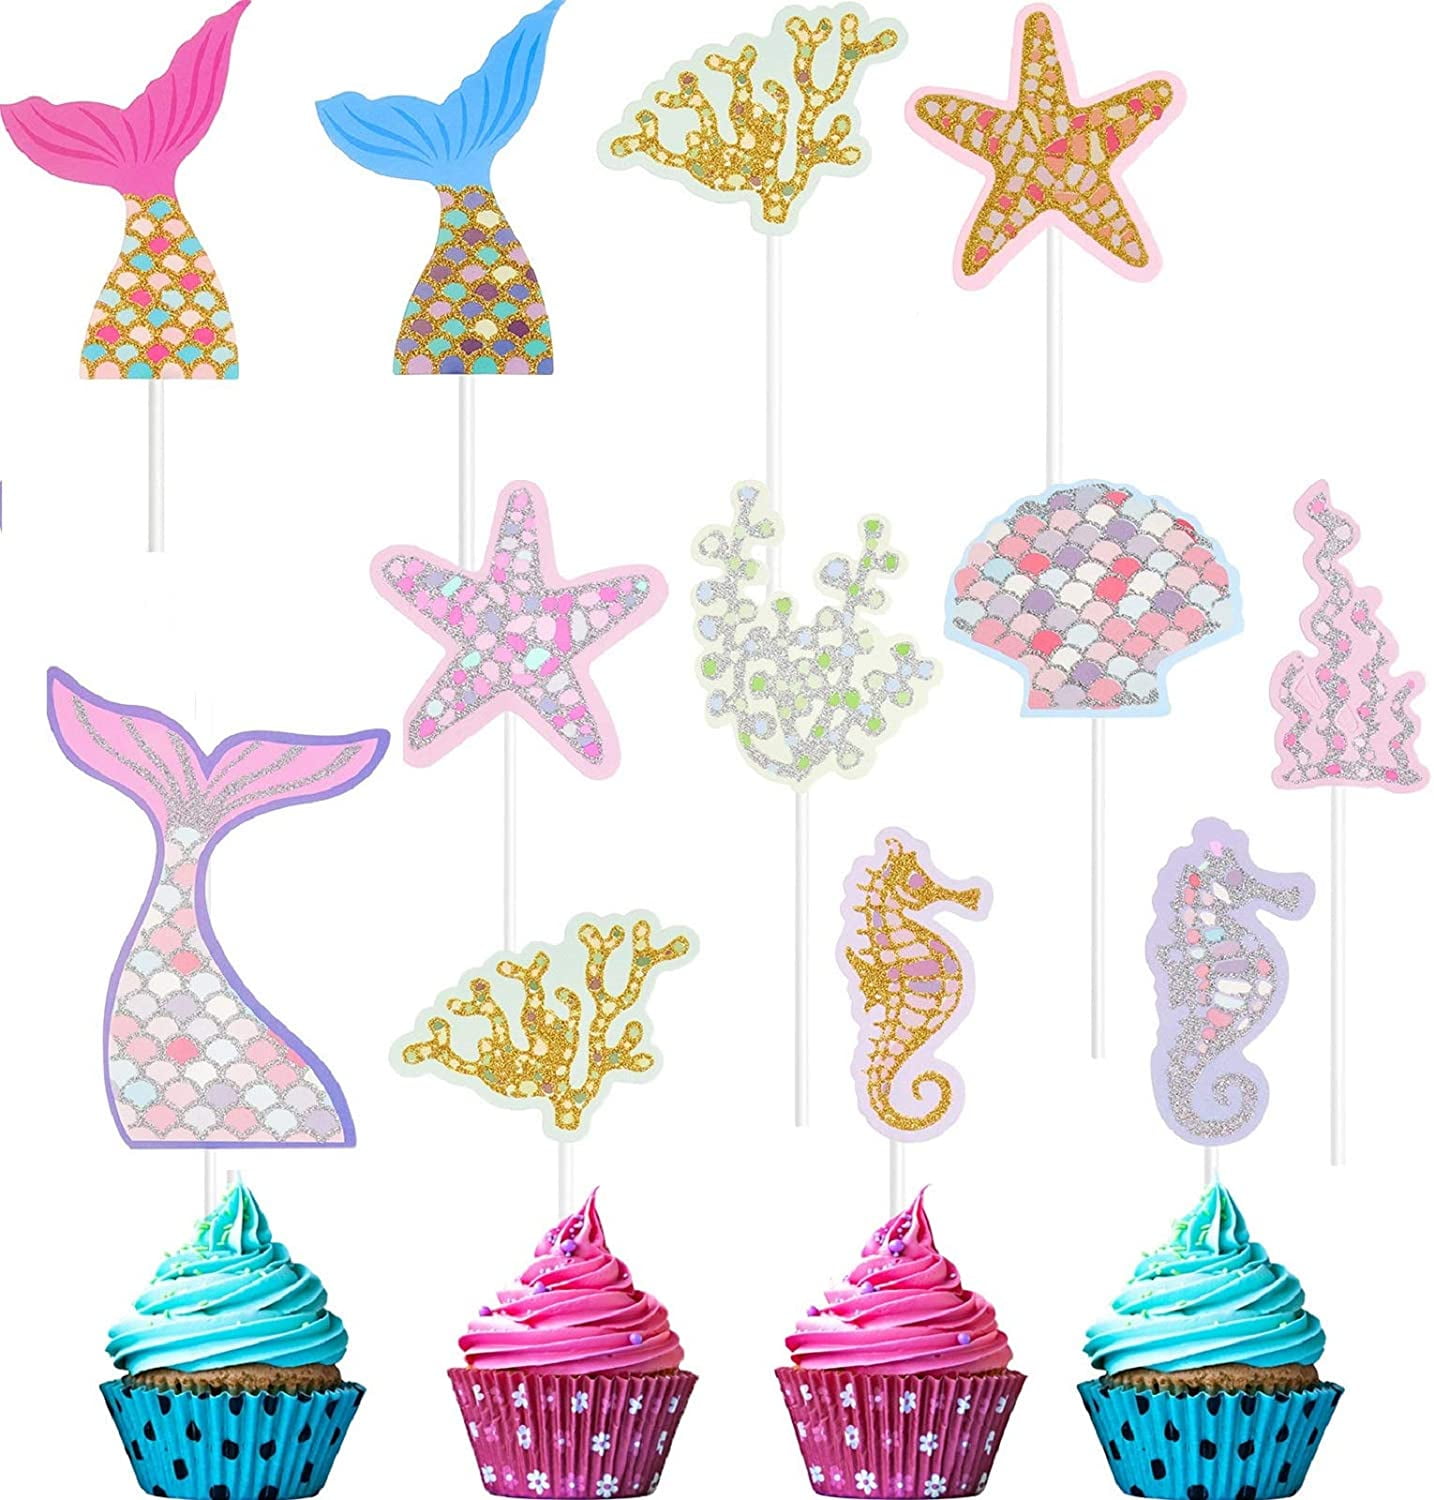 Include Mermaid Tail Glitter Cake Topper and 44 Pieces Ocean Glitter Cake Toppers for Baby Shower Party Mermaid Theme Cake Toppers Set 